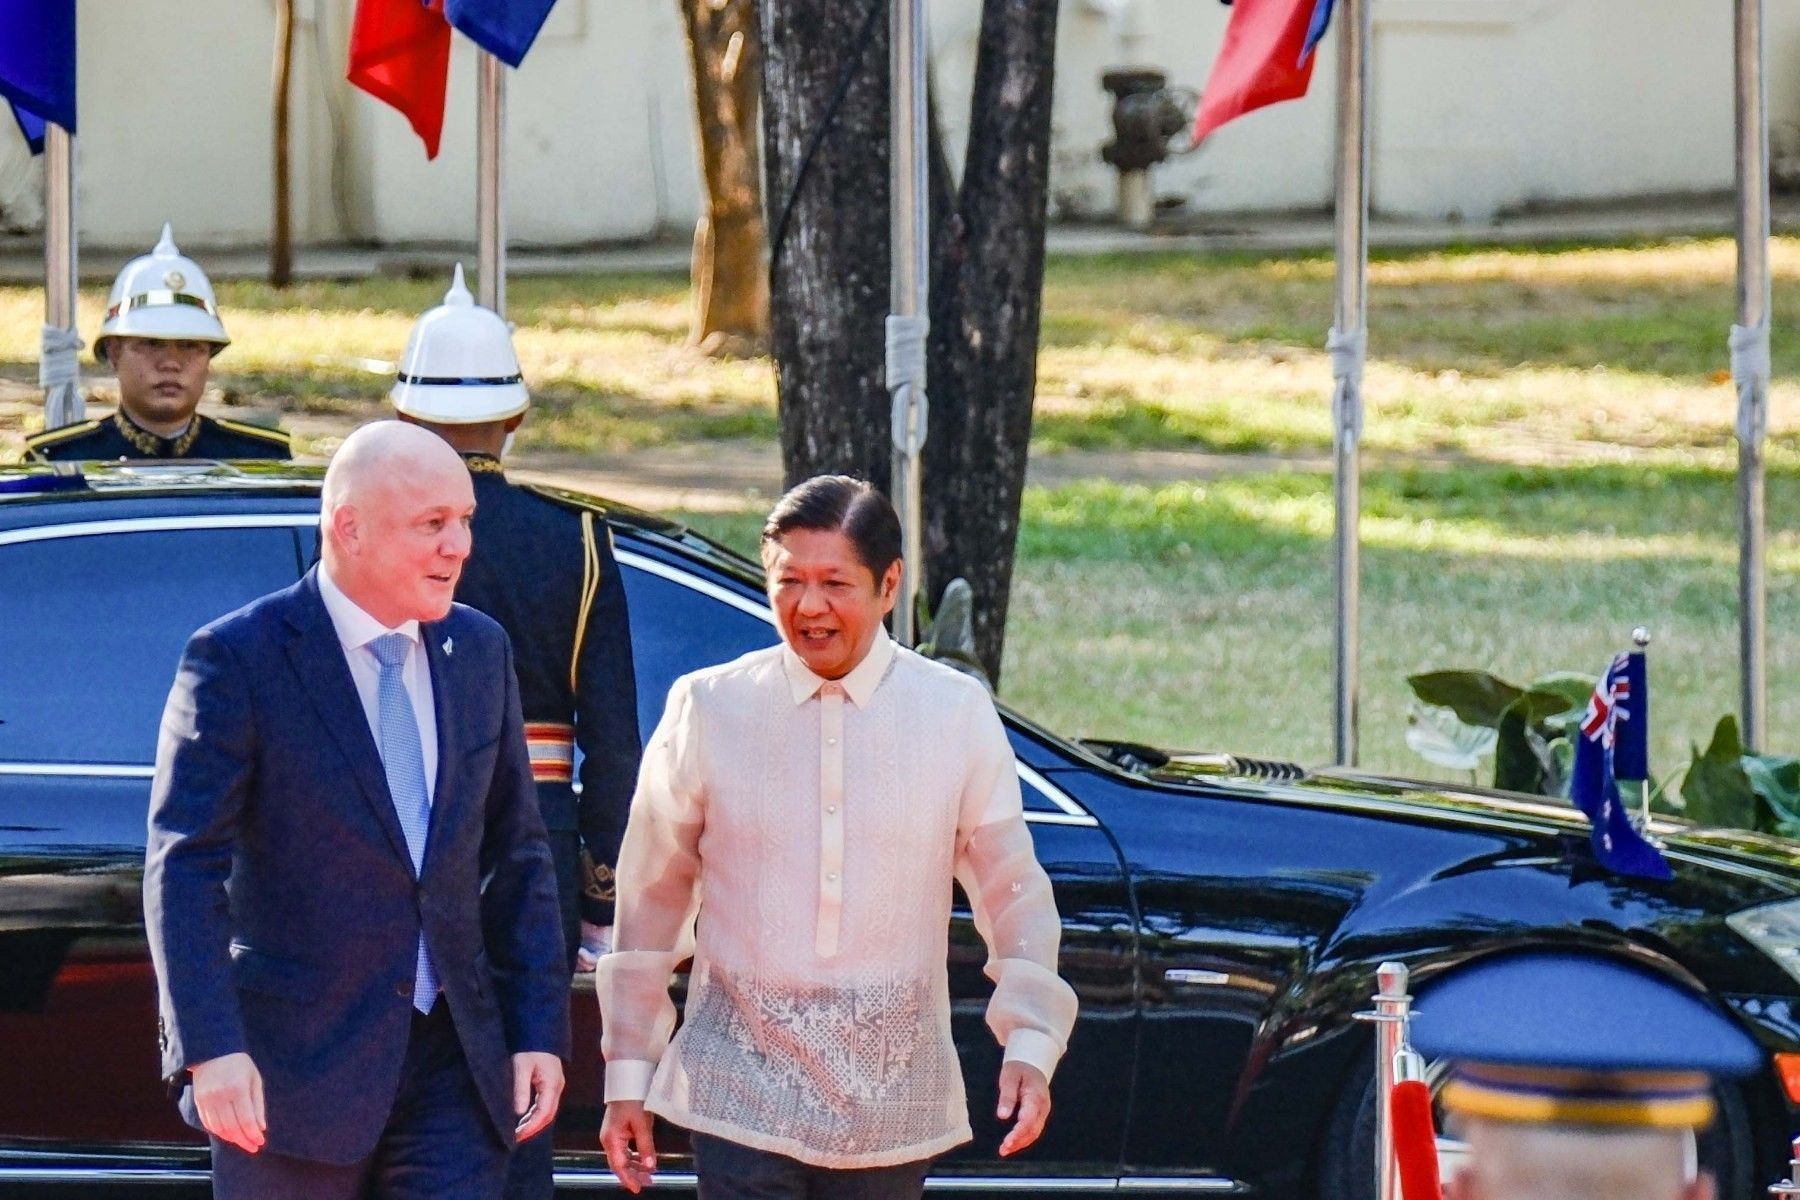 Philippines business groups forge PPP ties with New Zealand